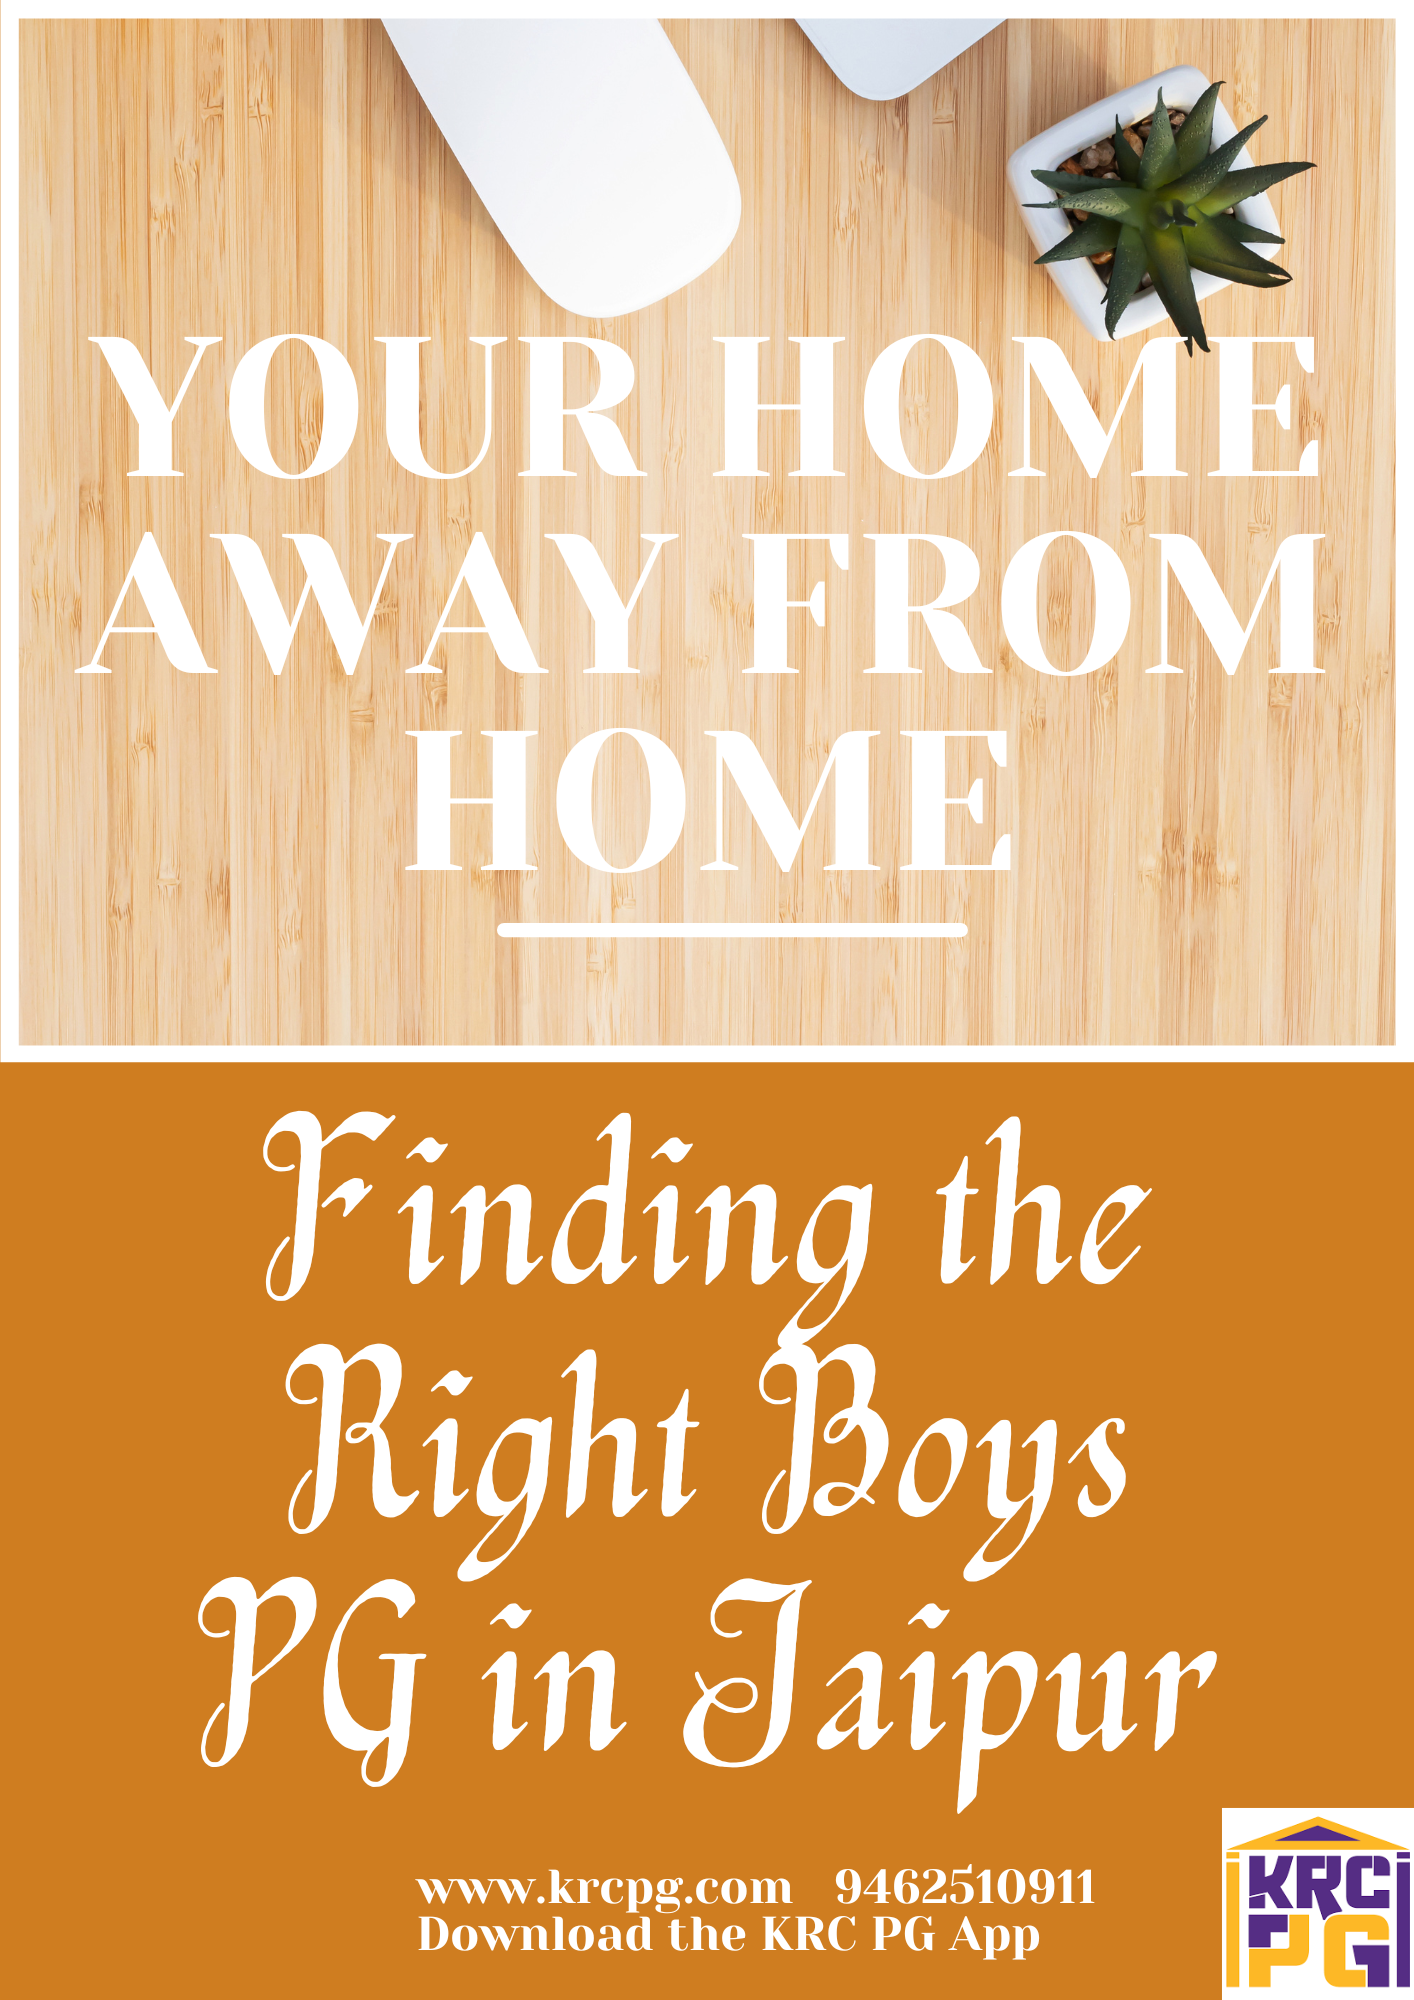 YOUR HOME AWAY FROM HOME: FINDING THE RIGHT BOYS PG IN JAIPUR